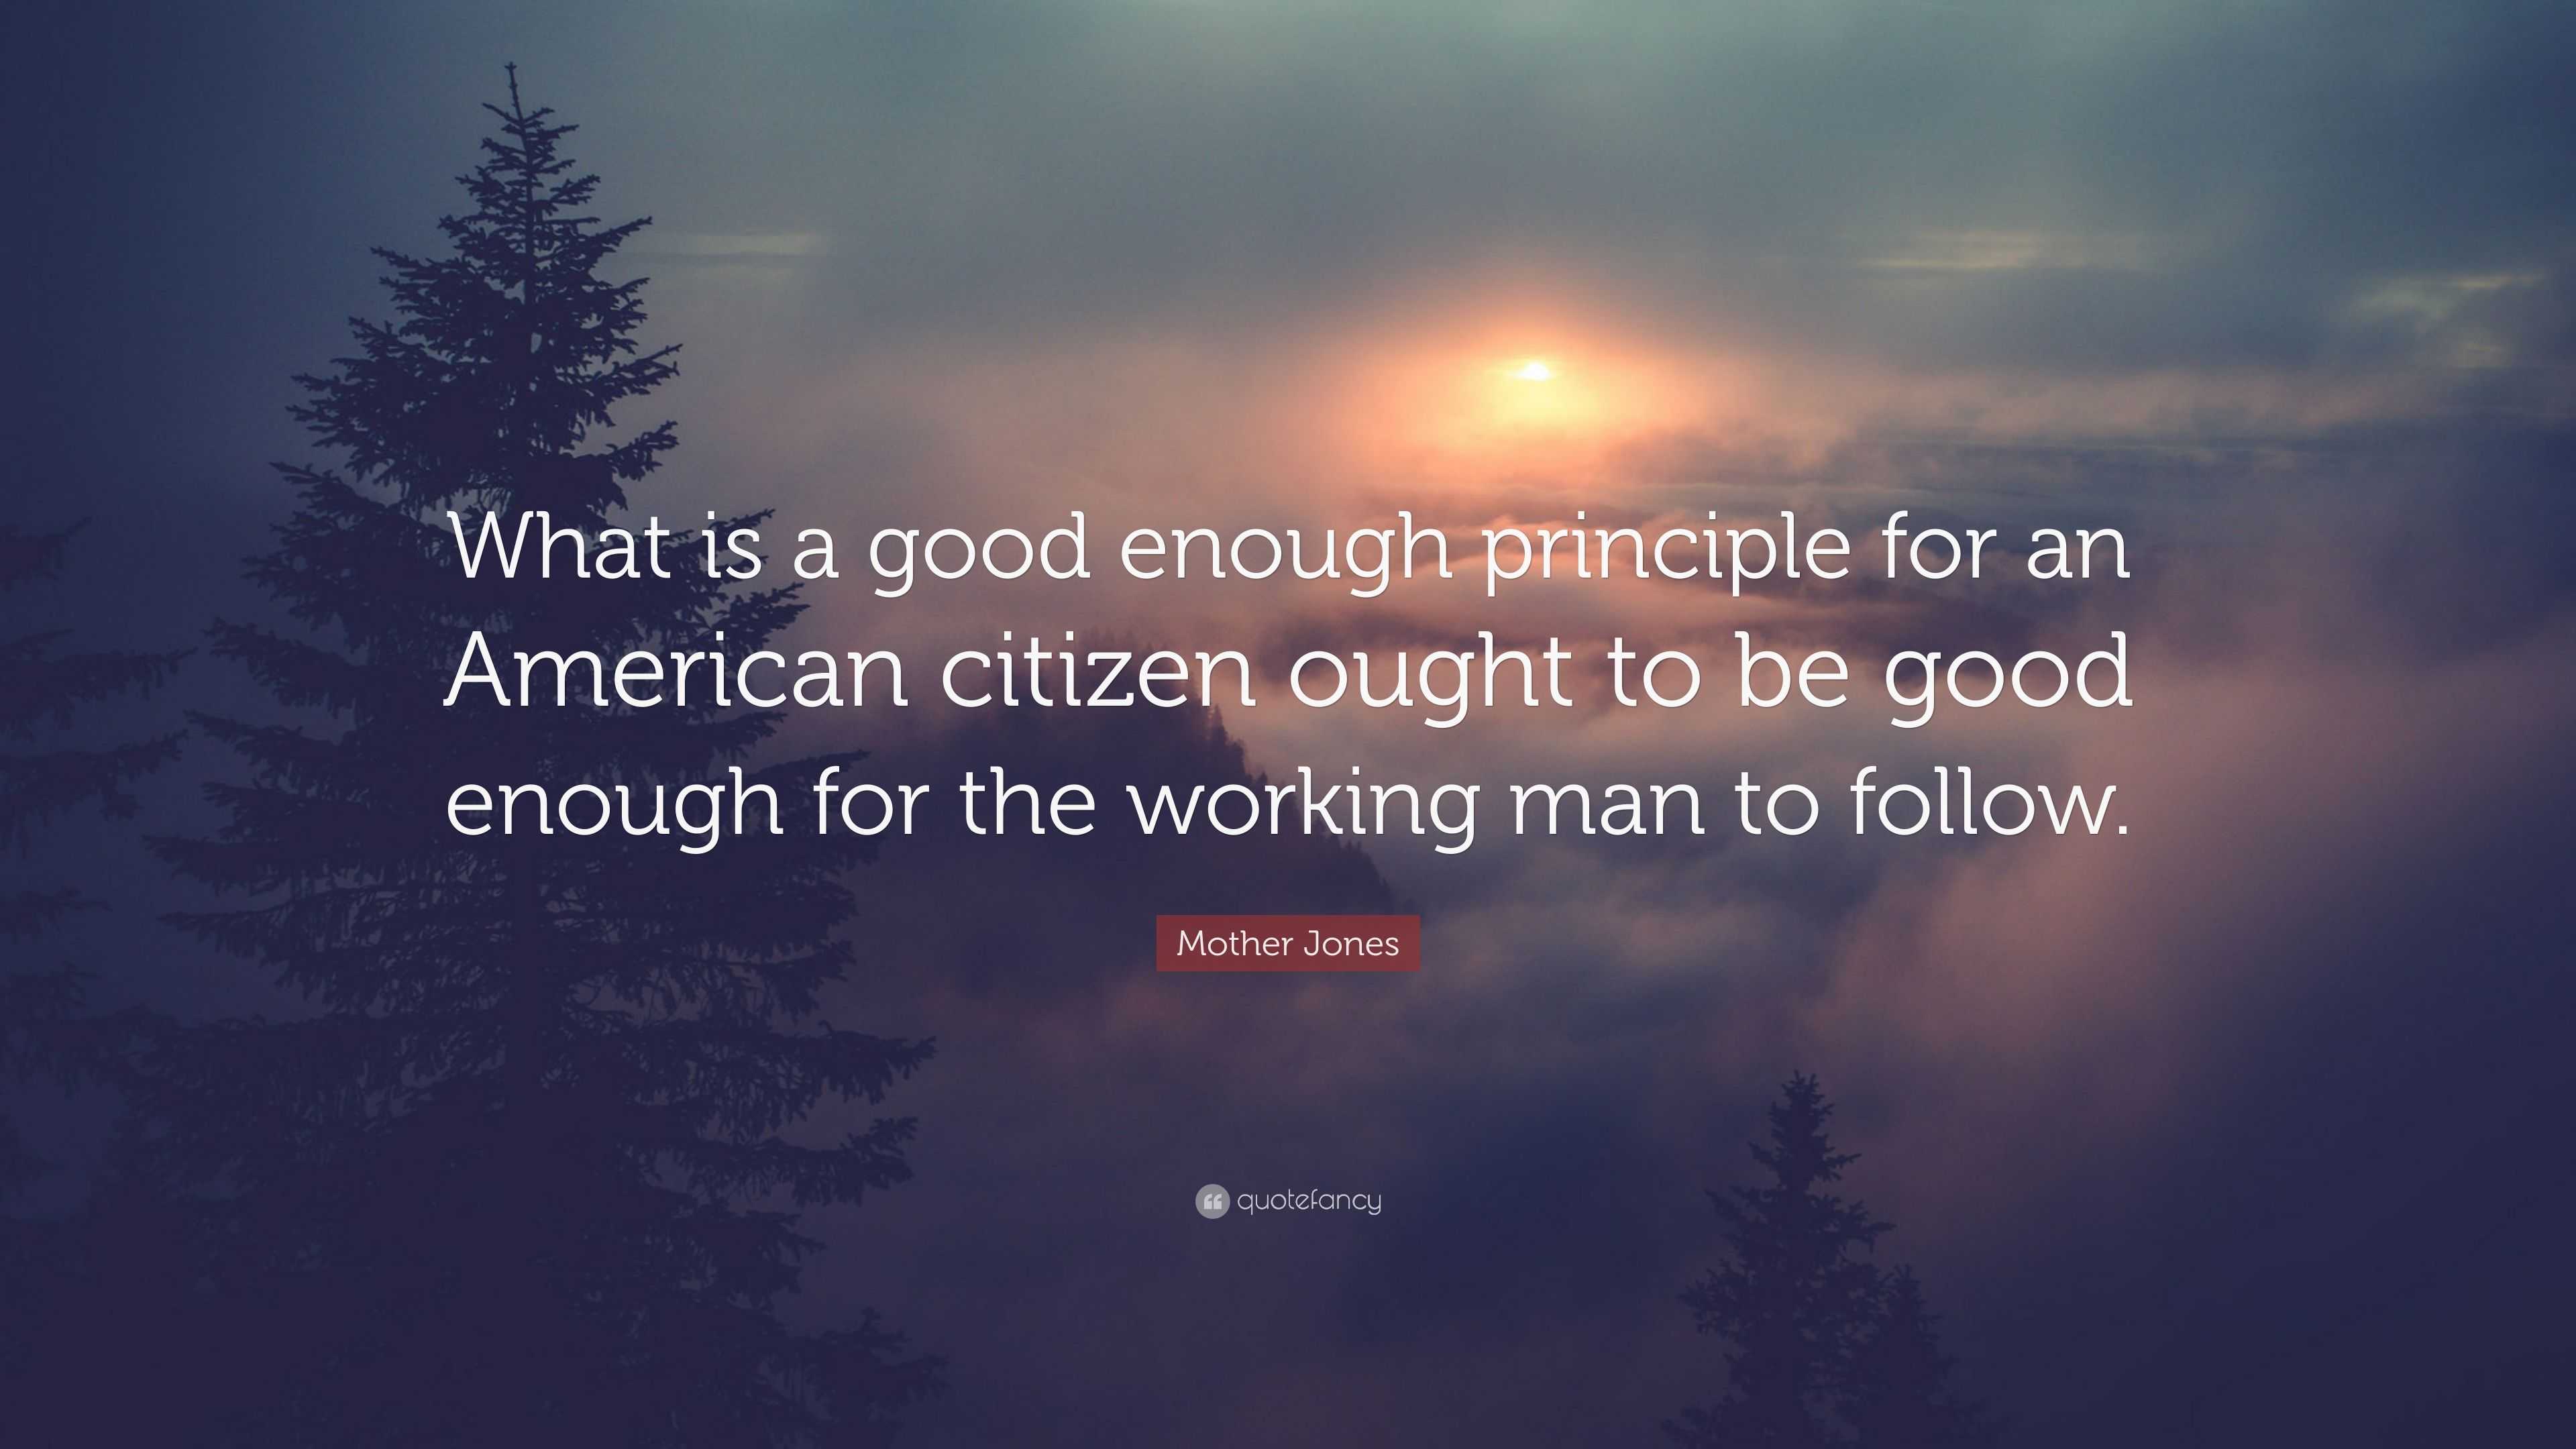 Mother Jones Quote: “What is a good enough principle for an American ...